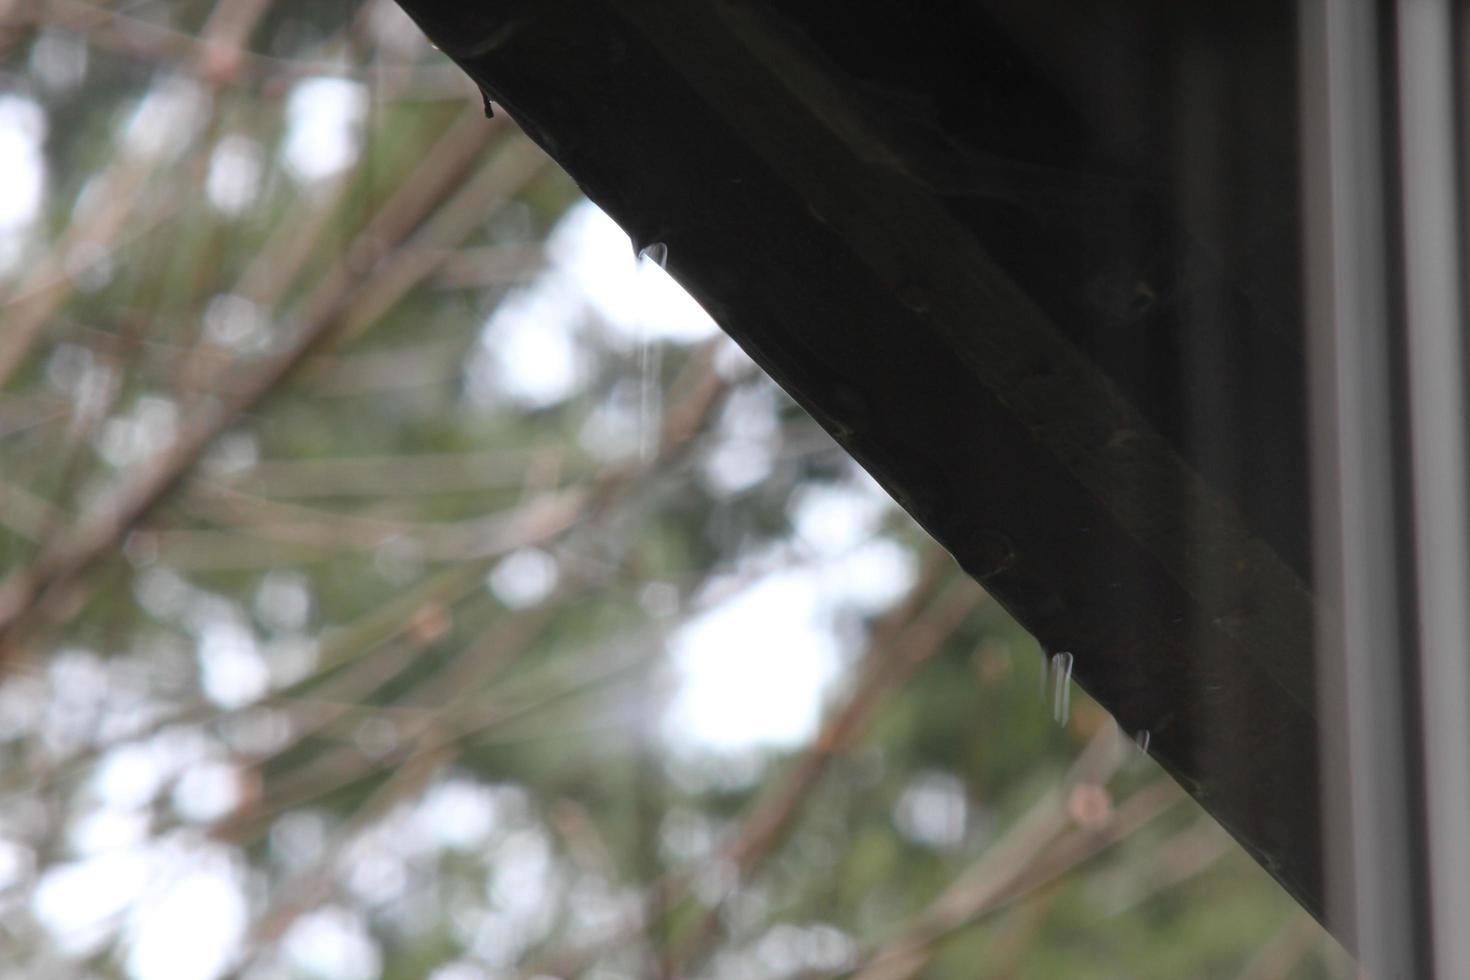 Rain drops from the eaves as it rains. photo